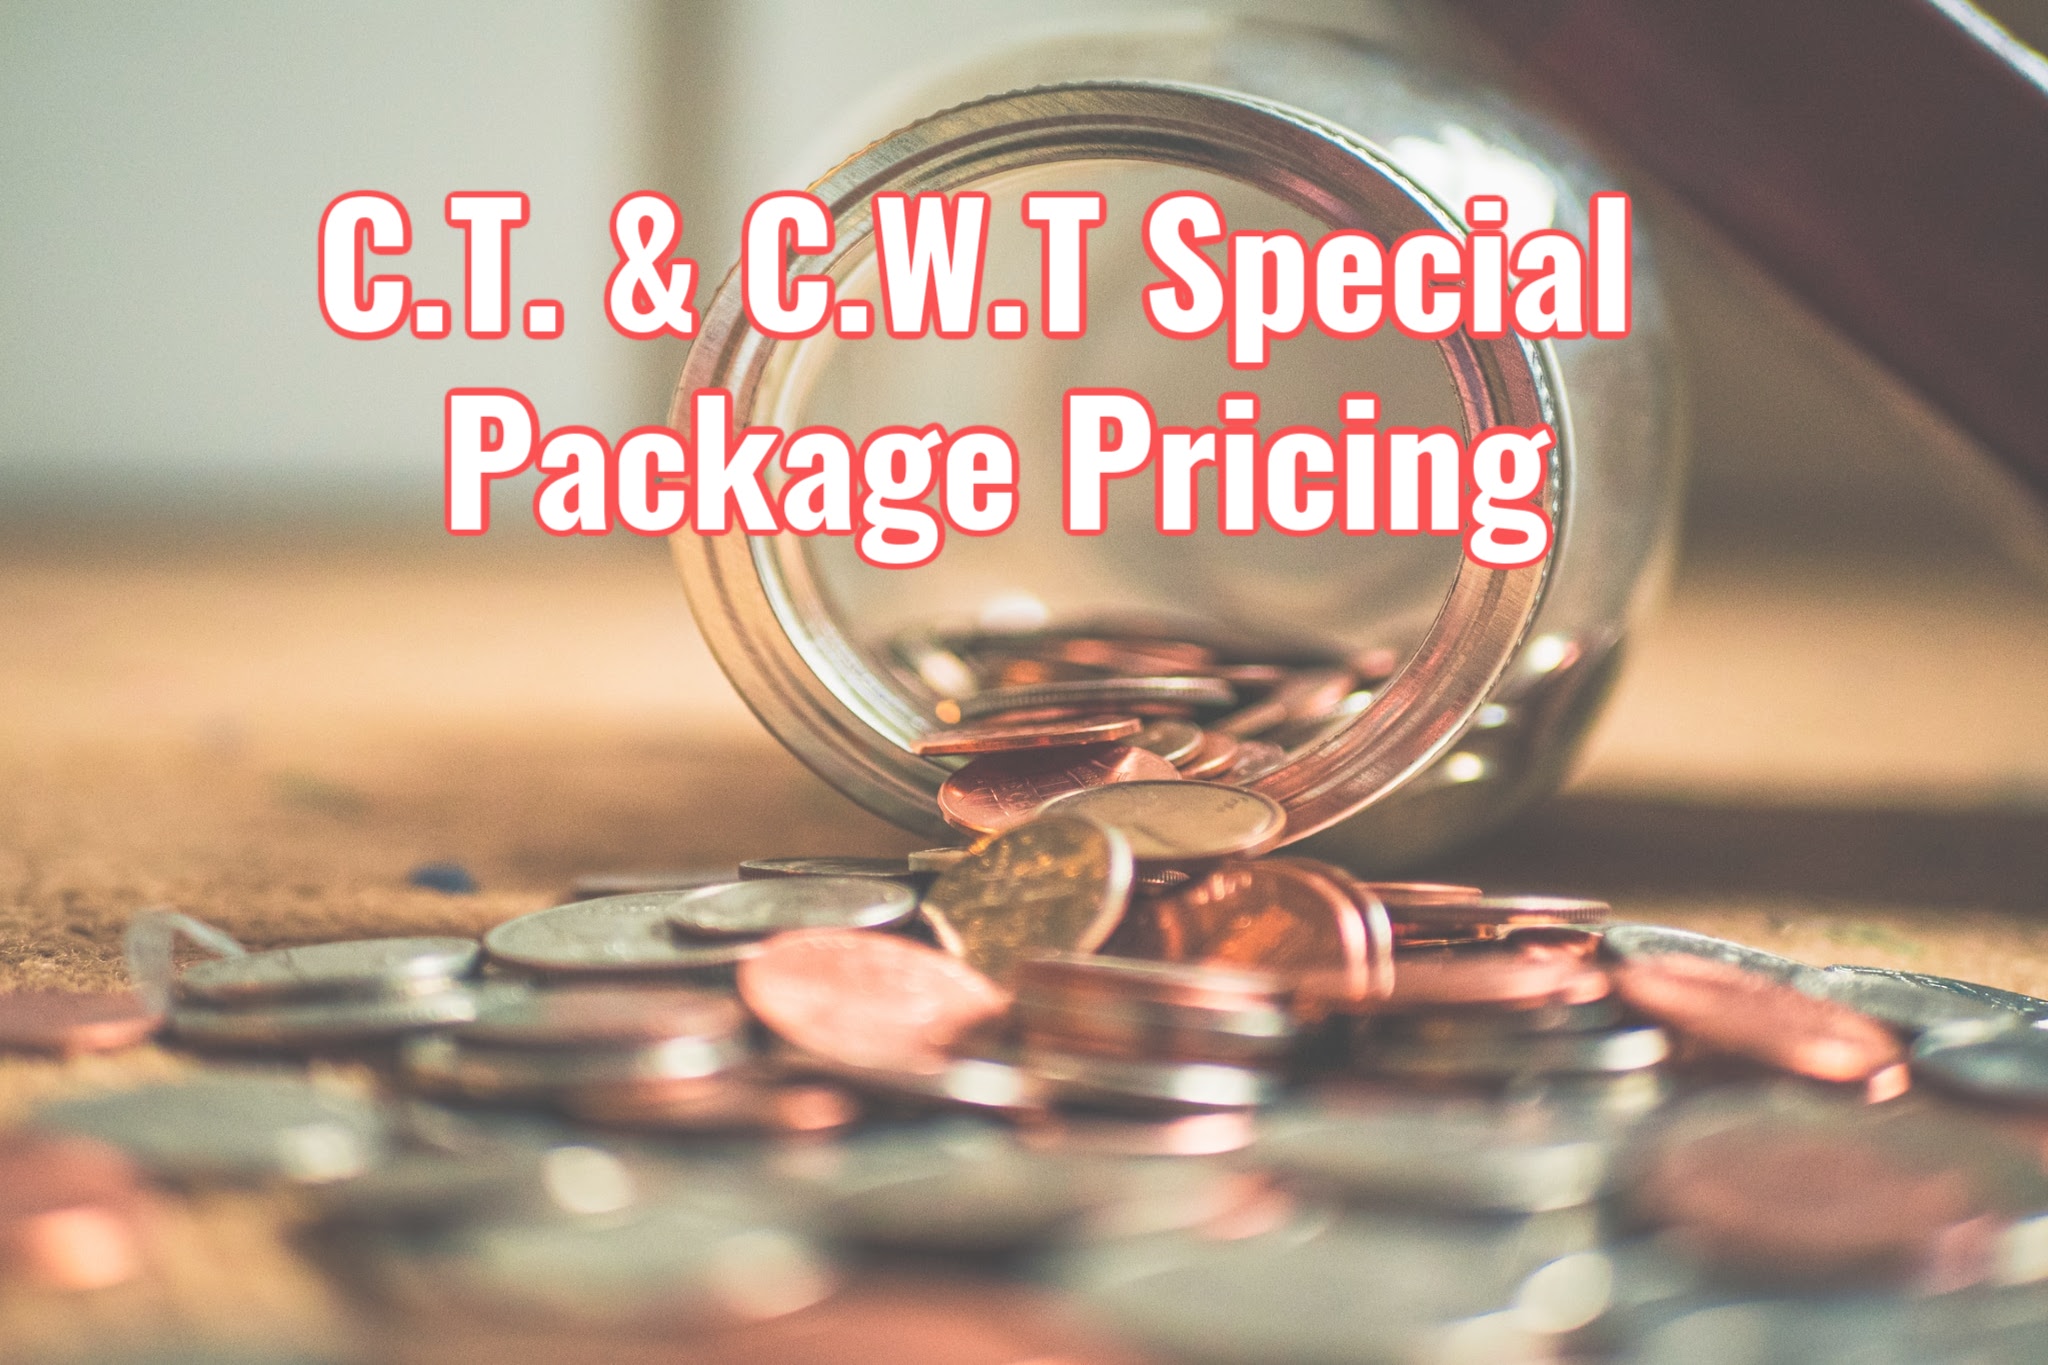 C.T. & C.W.T Special Package Pricing